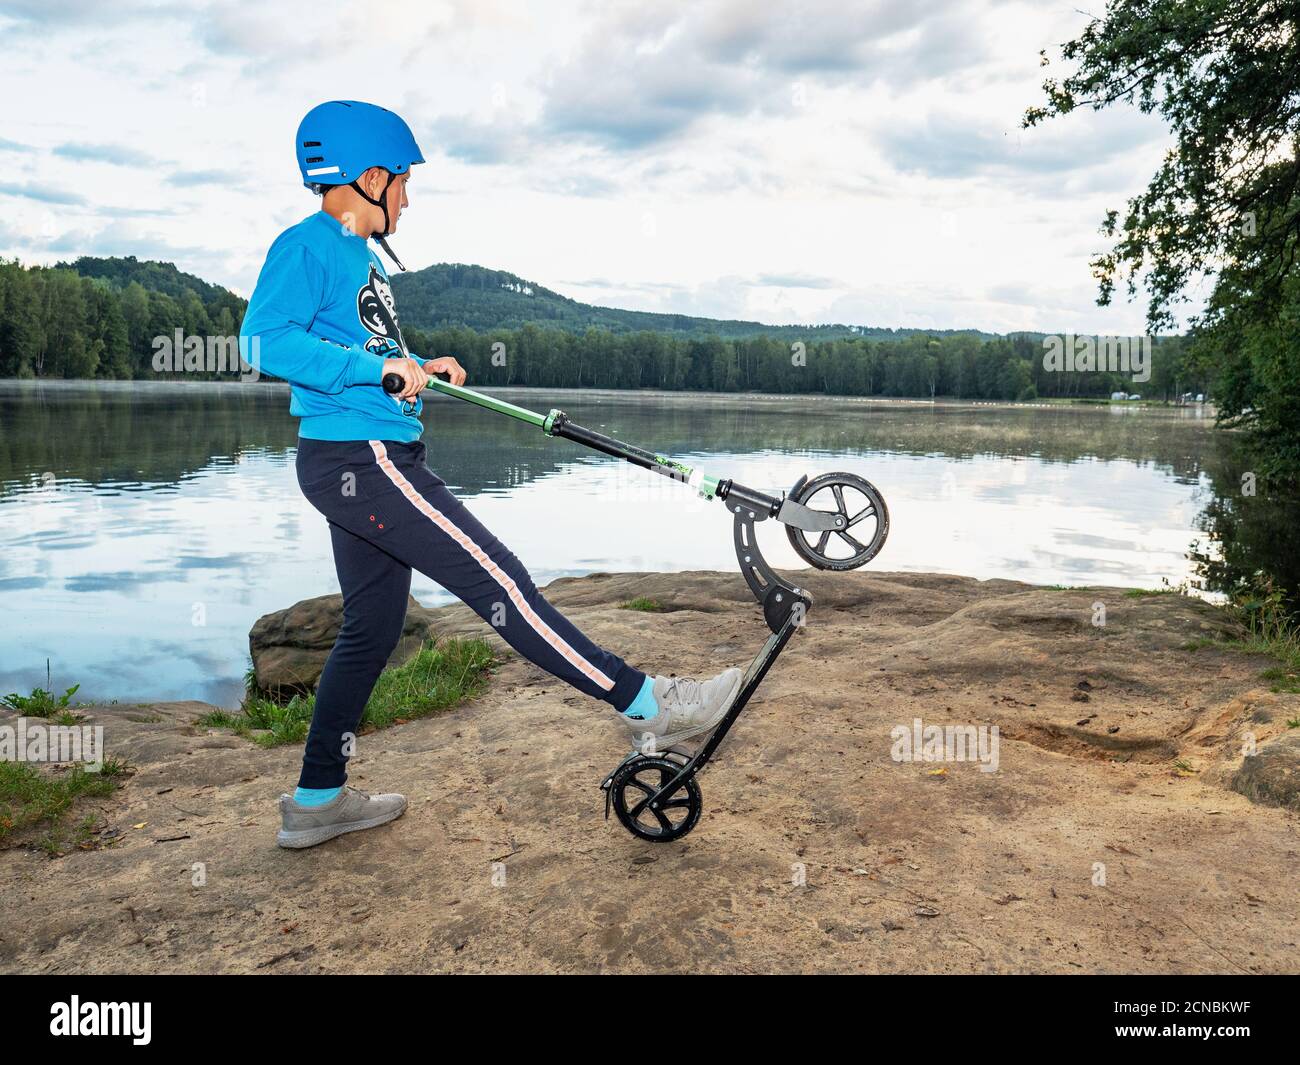 Boy with scooter makes trick on rocky lake bank Stock Photo